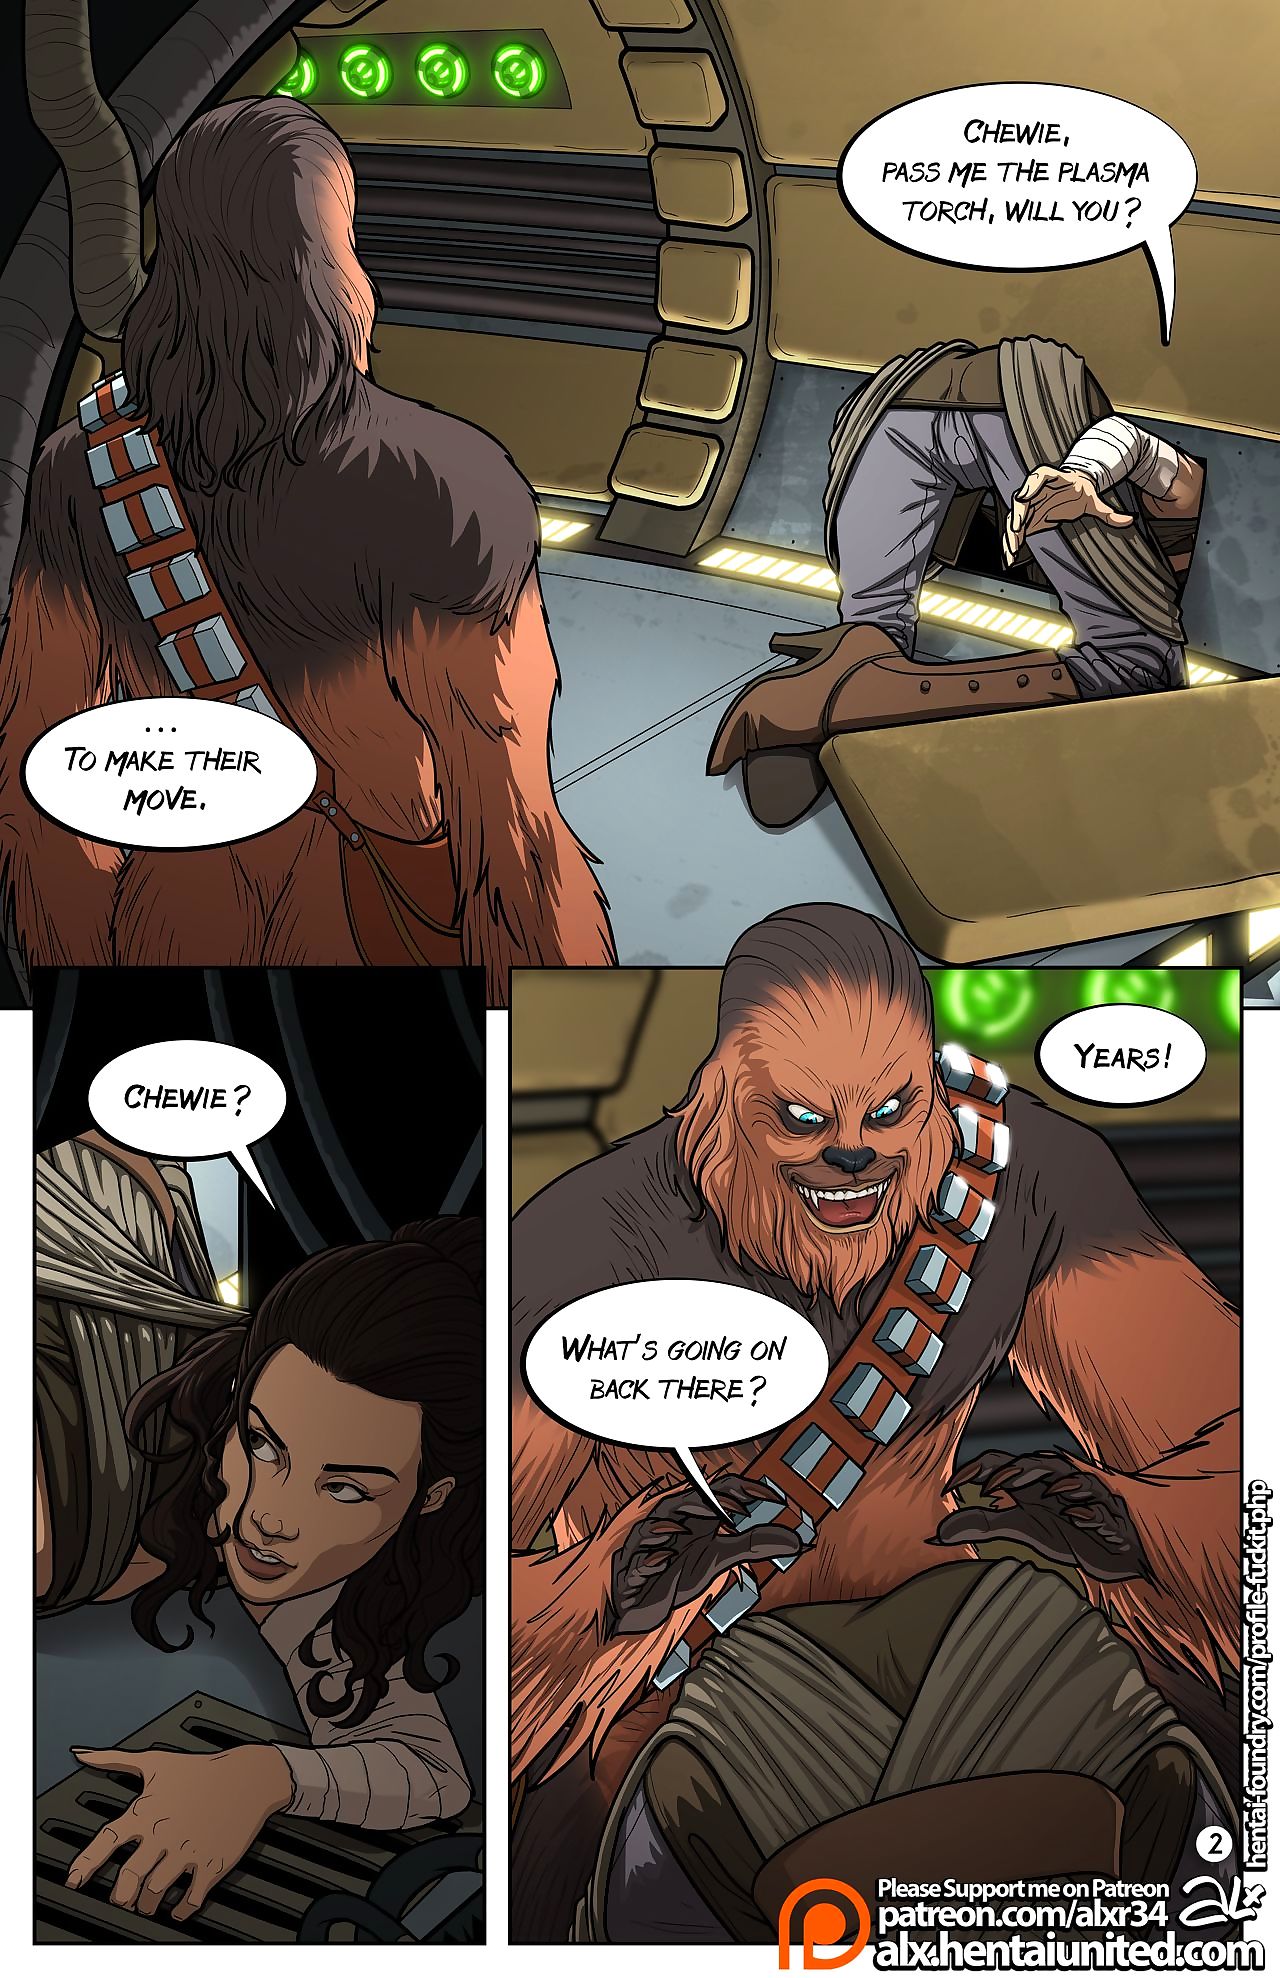 Fuckit- A Complete Guide to Wookie Sex